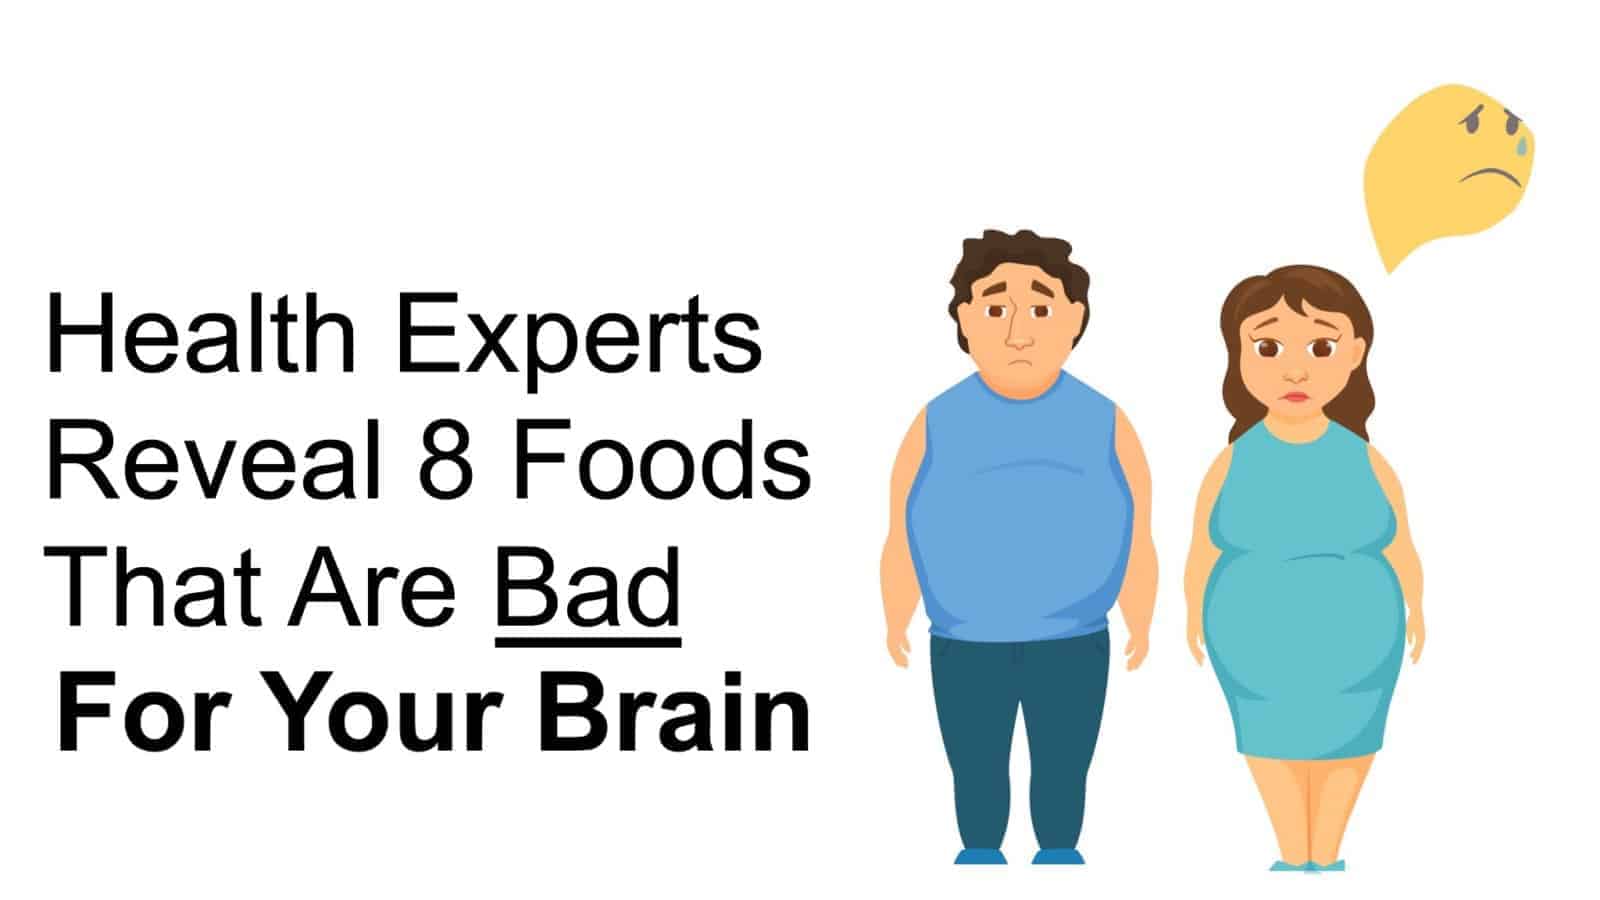 Health Experts Reveal 8 Foods That Are Bad For Your Brain